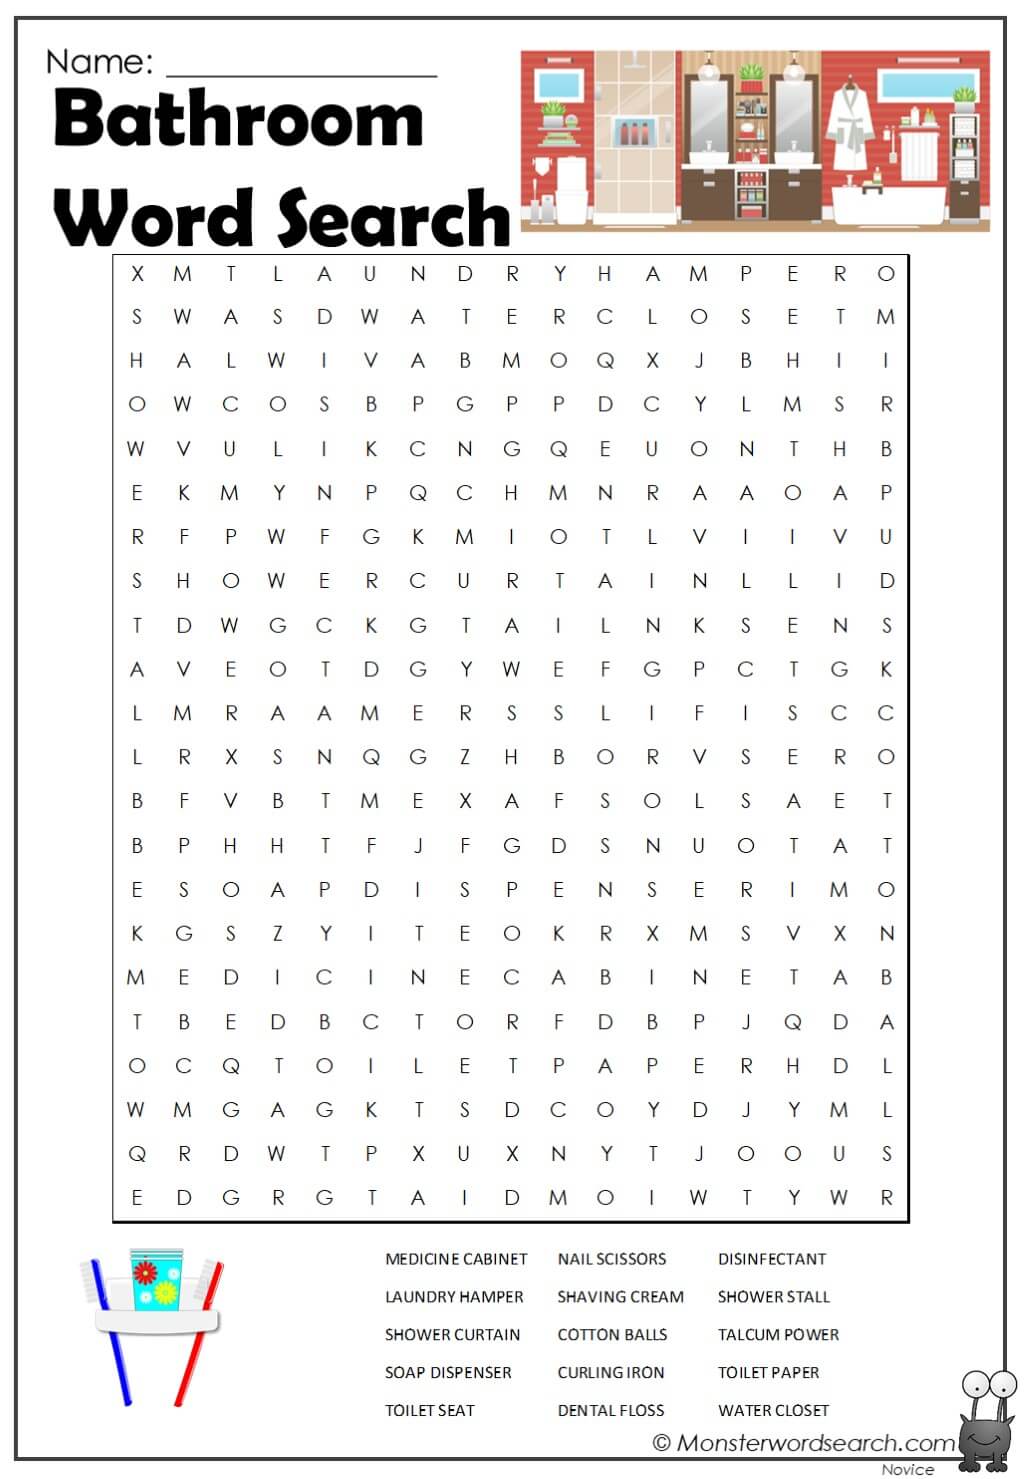 bathroom-word-search-monster-word-search